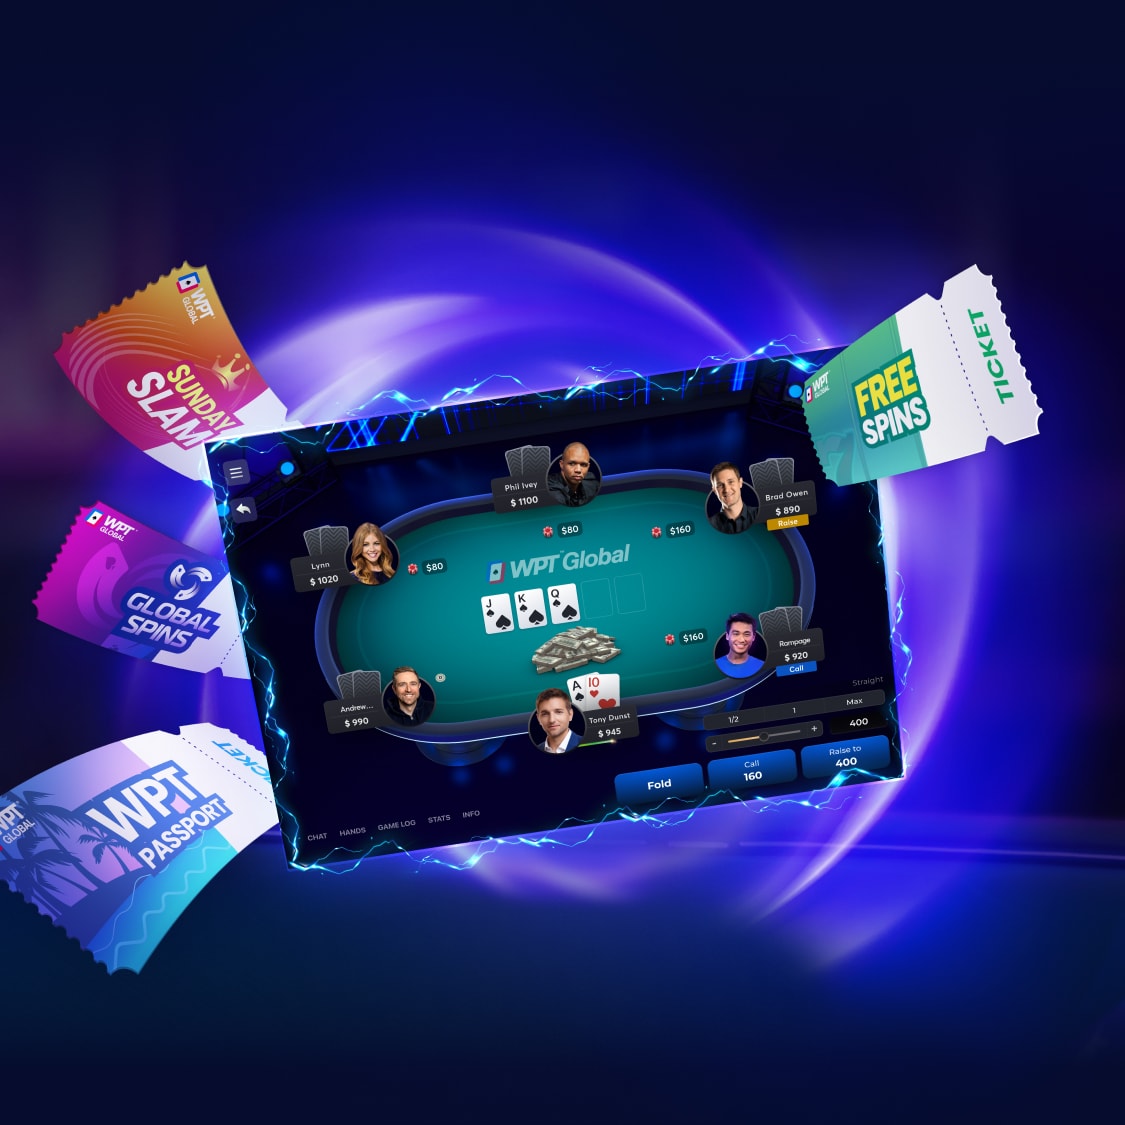 Deposit now and receive your WPT® Global Ticket Package